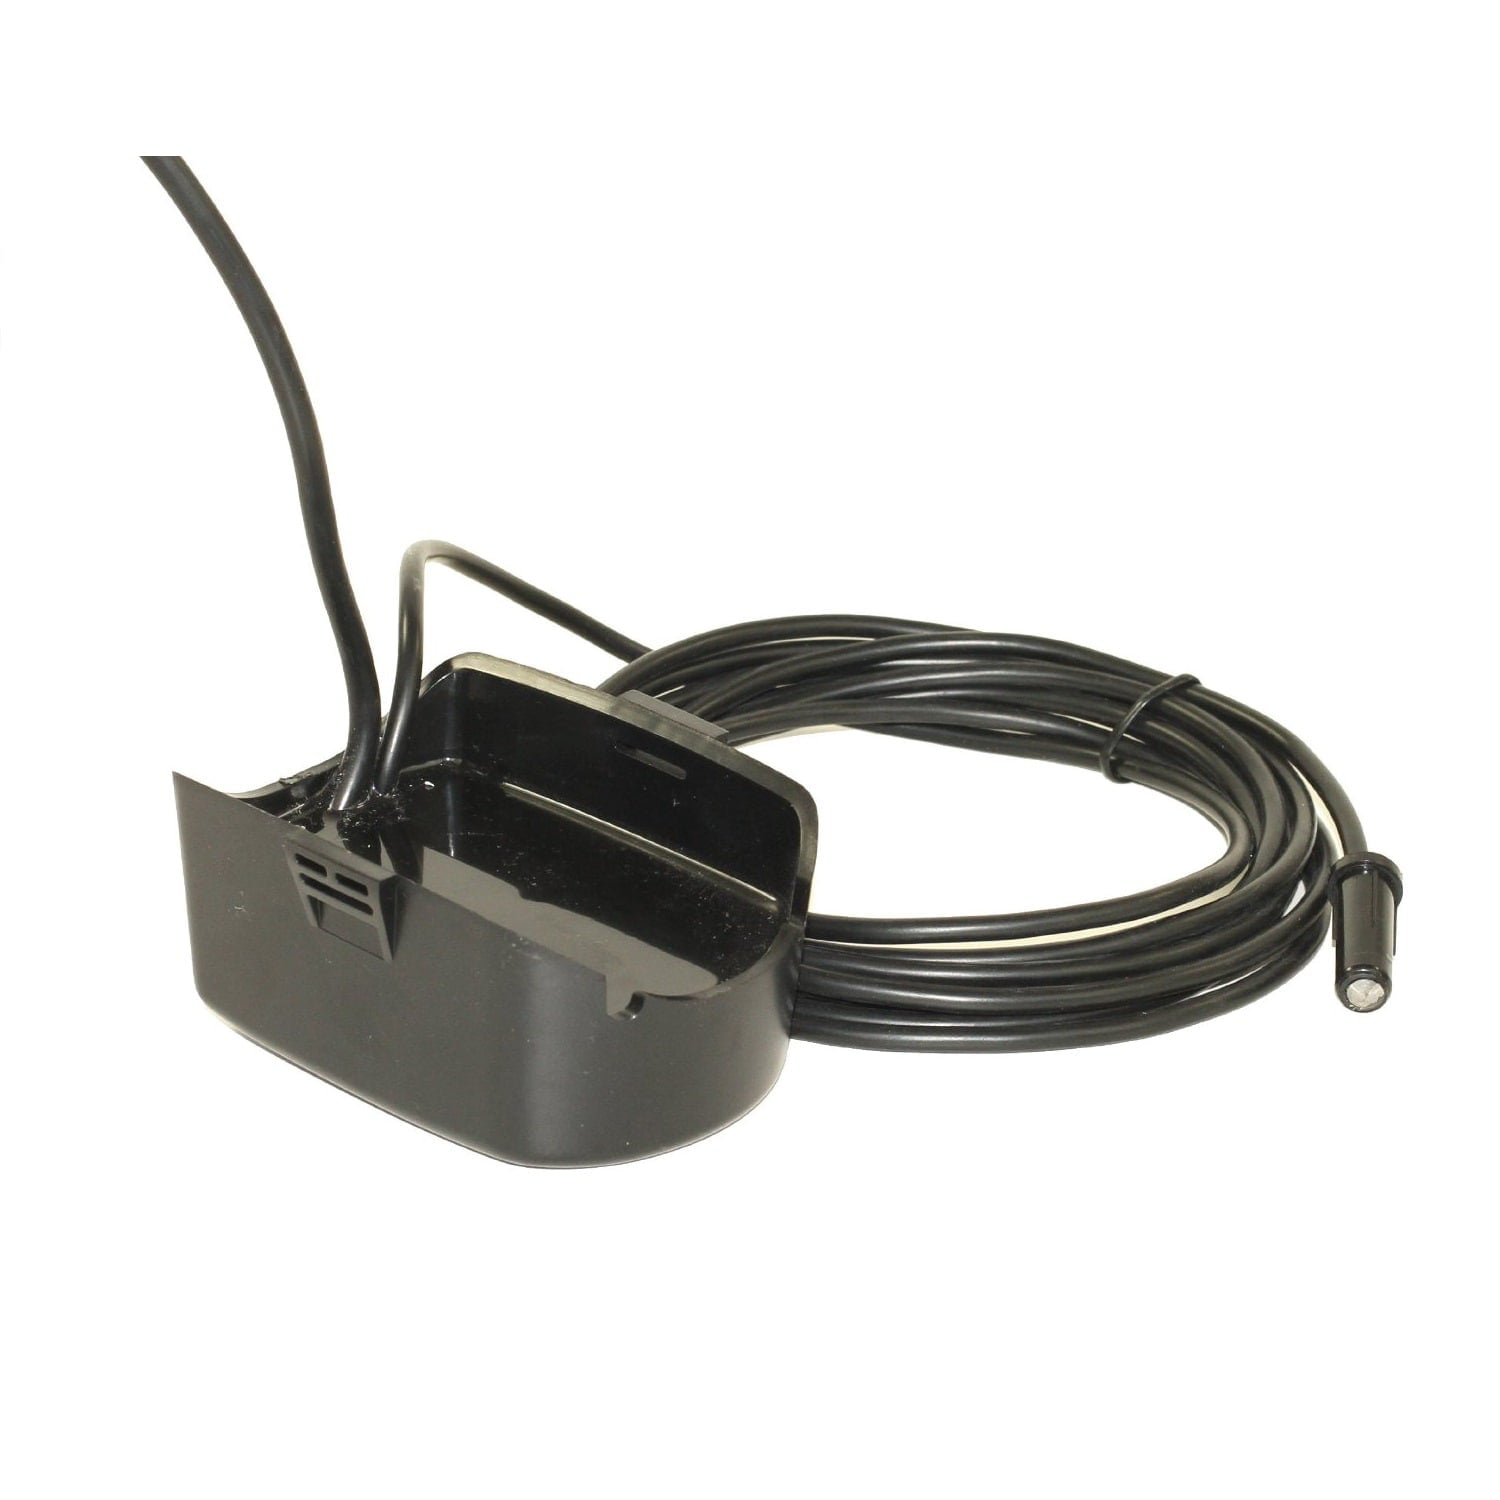 Humminbird Xtm9si180t Transducer XTM 9 SI 180 T for sale online 